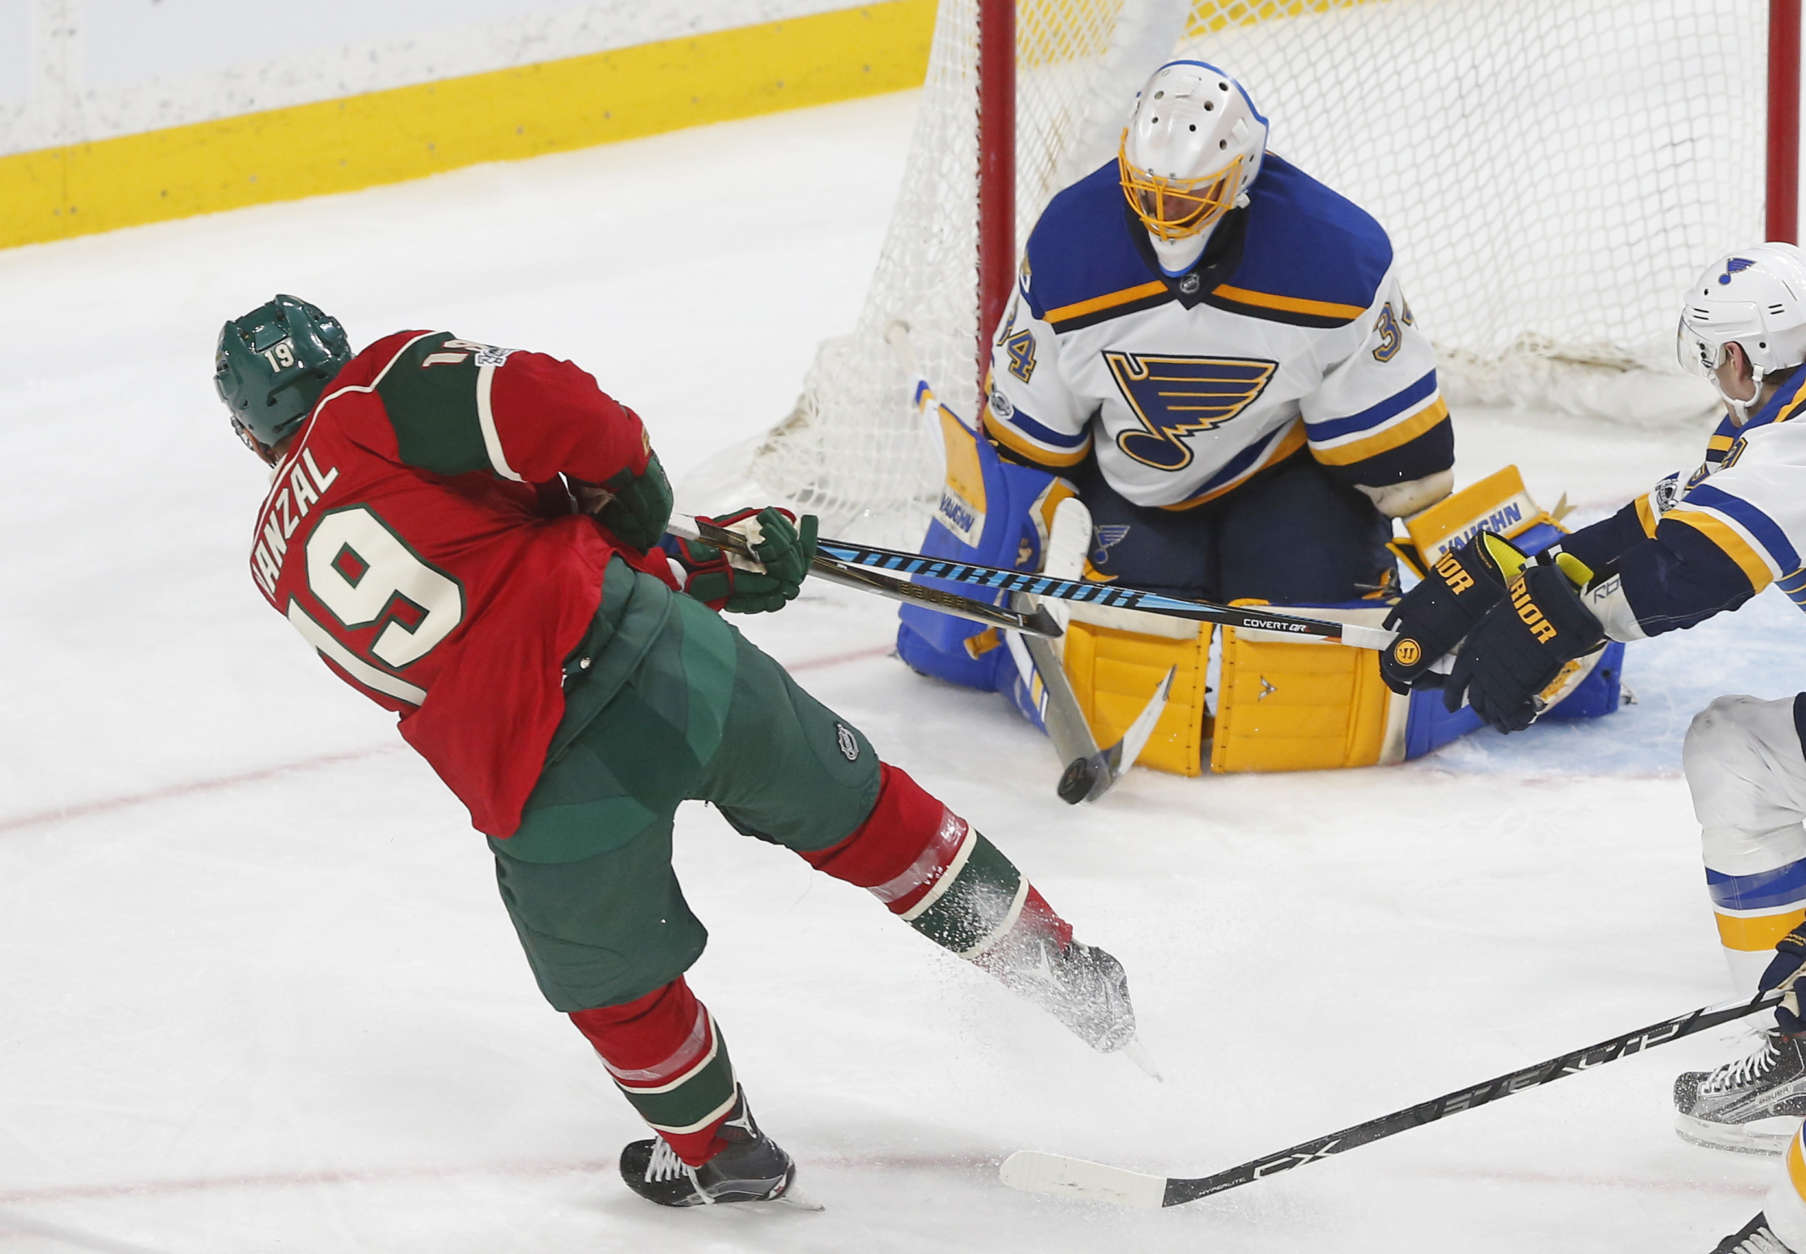 St. Louis Blues goalie Jake Allen stops a shot by Minnesota Wild's Martin Hanzal during the third period of an NHL hockey game Tuesday, March 7, 2017, in St. Paul, Minn. The Blues won 2-1. (AP Photo/Jim Mone)